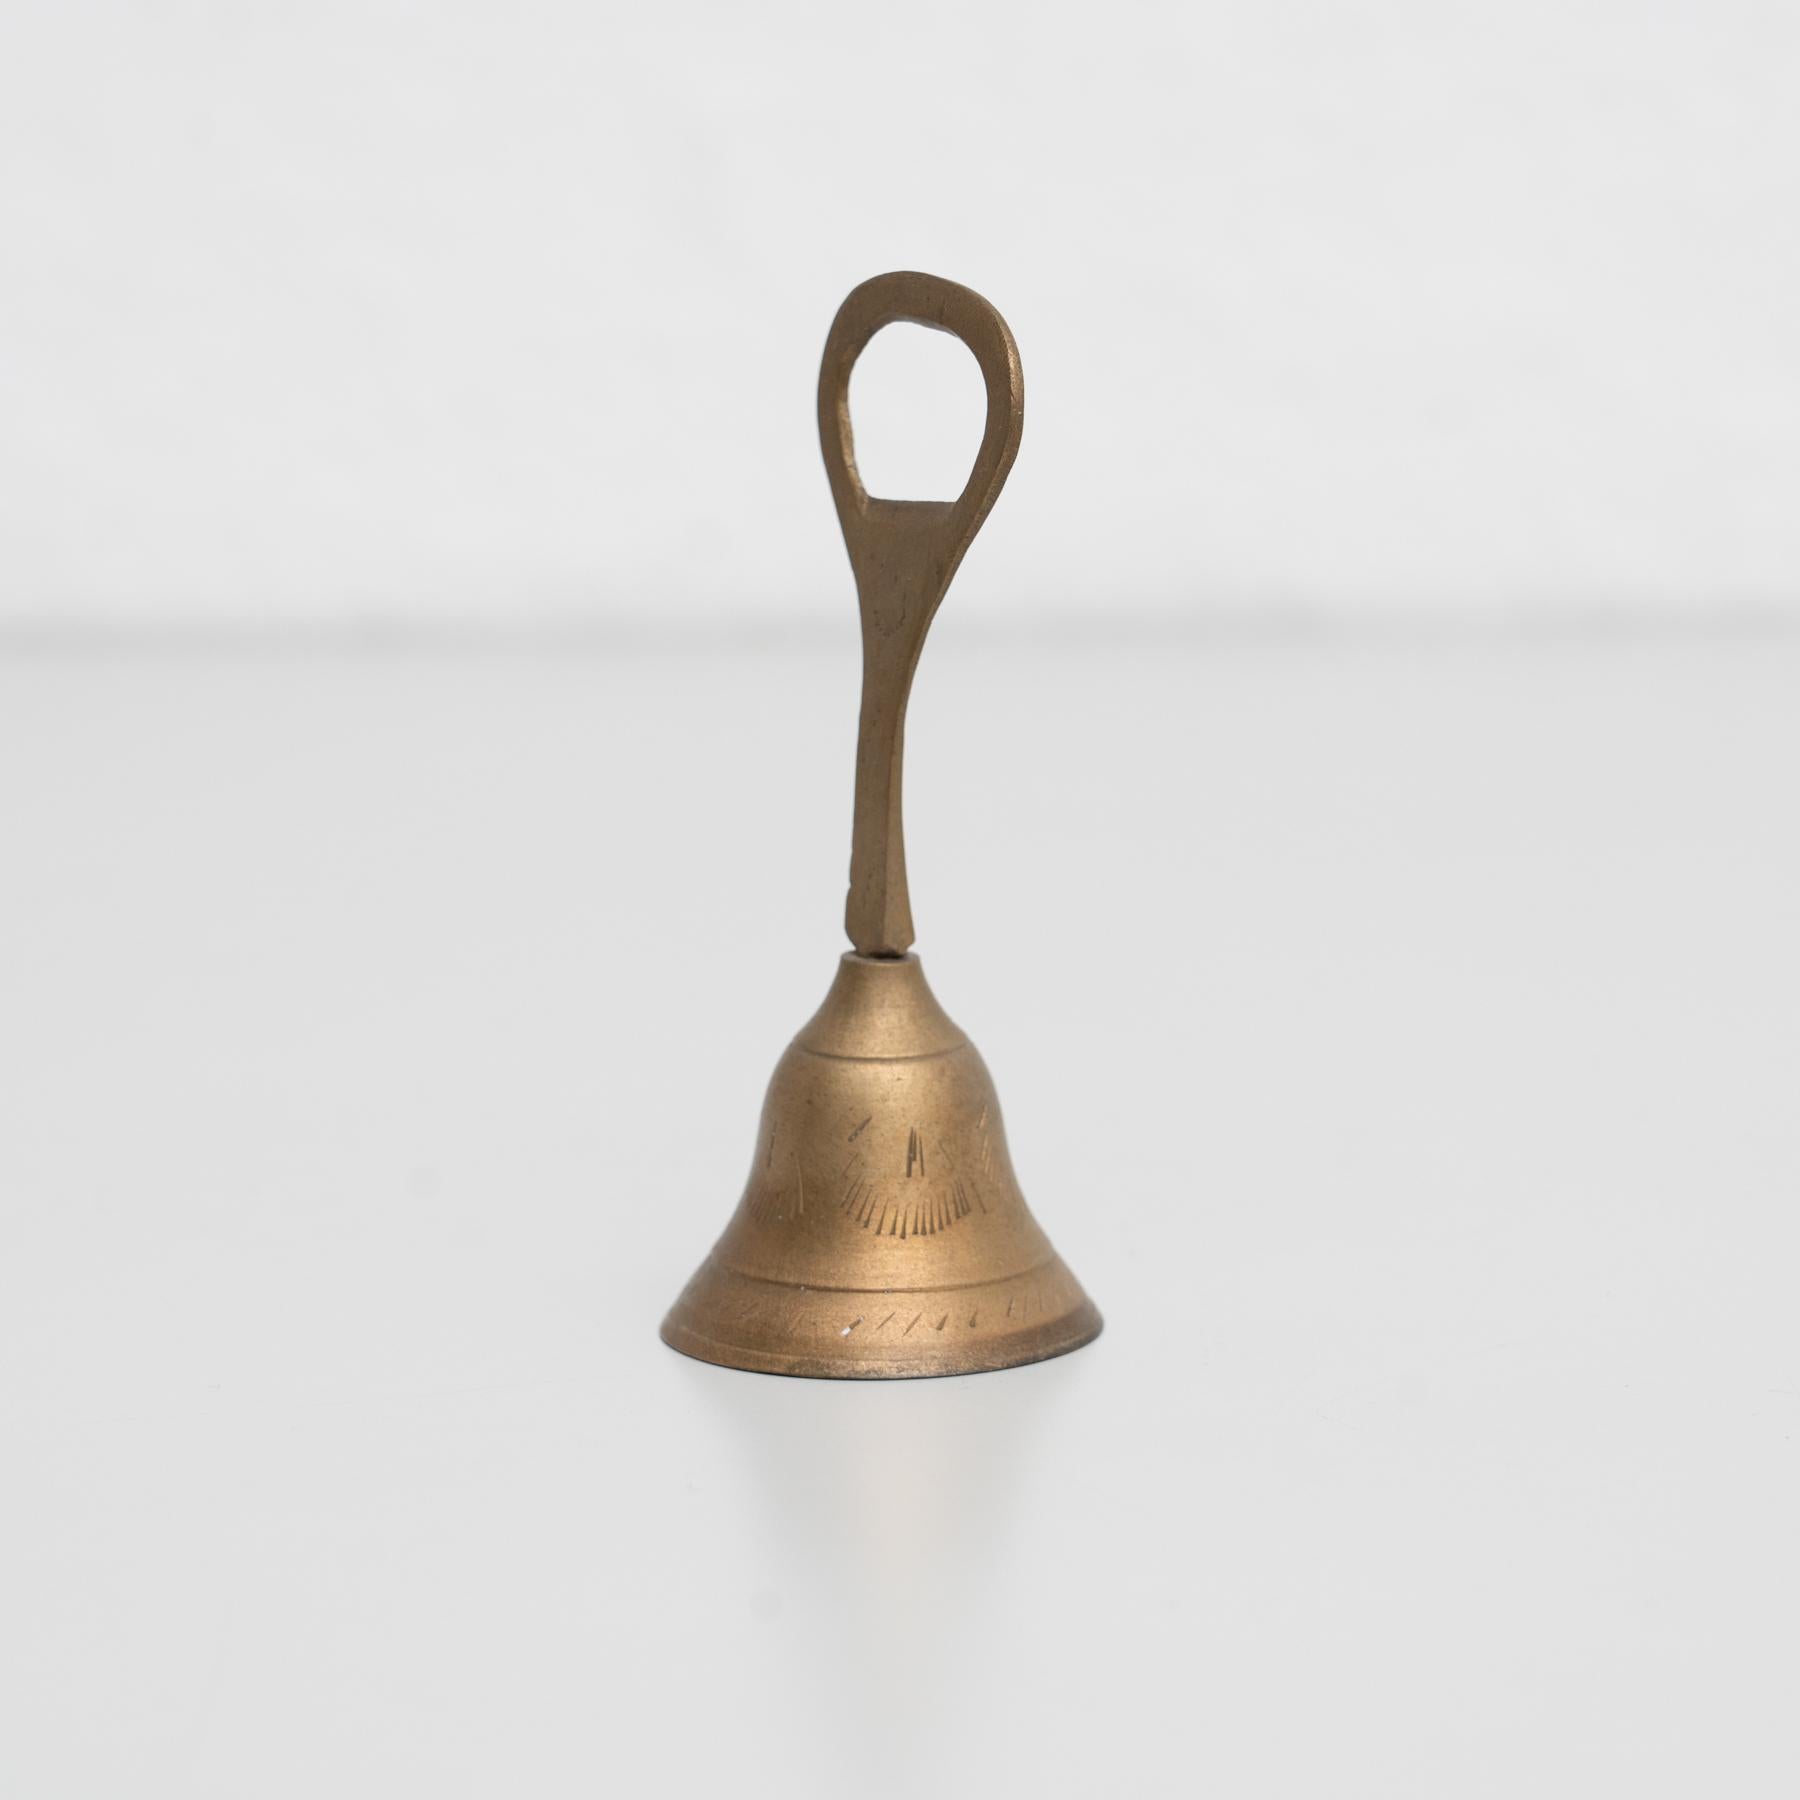 Traditional rustic metal hand bell bottle opener, by unknown manufacturer from Spain, circa 1950.

In original condition, with minor wear consistent with age and use, preserving a beautiful patina.

Materials:
Metal.
 